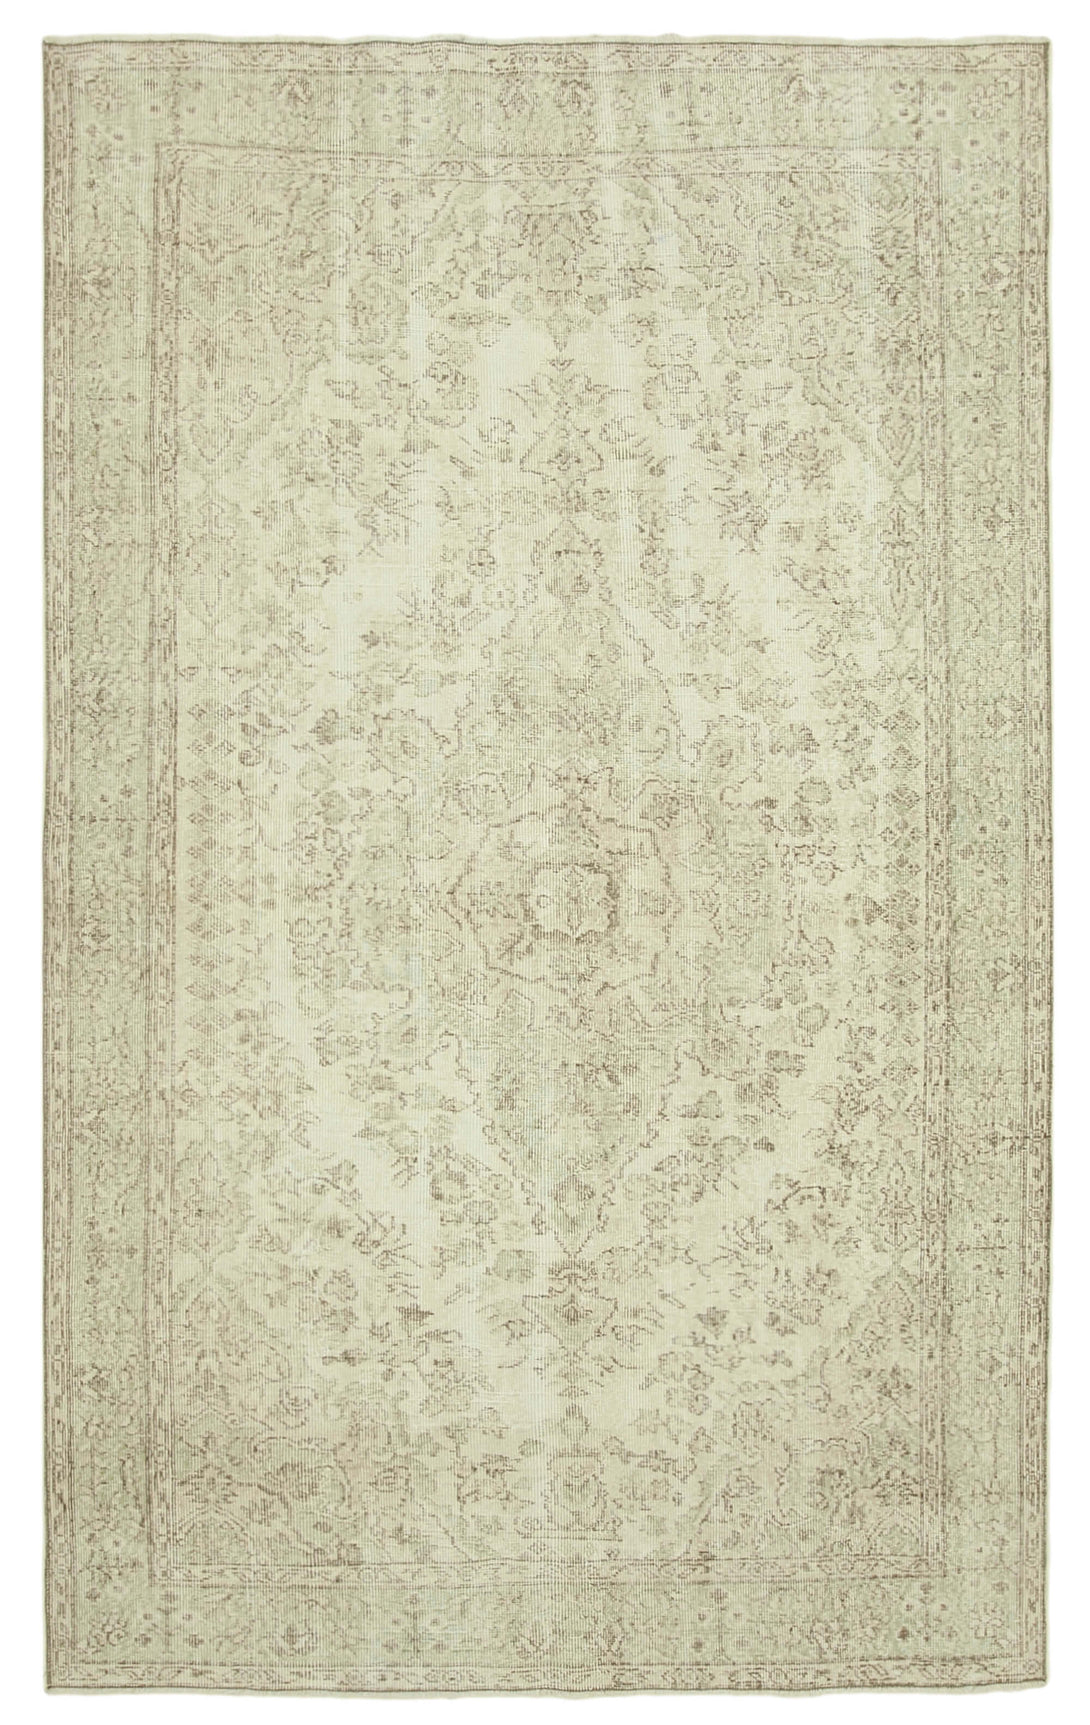 Handmade White Wash Area Rug > Design# OL-AC-39017 > Size: 5'-10" x 9'-7", Carpet Culture Rugs, Handmade Rugs, NYC Rugs, New Rugs, Shop Rugs, Rug Store, Outlet Rugs, SoHo Rugs, Rugs in USA